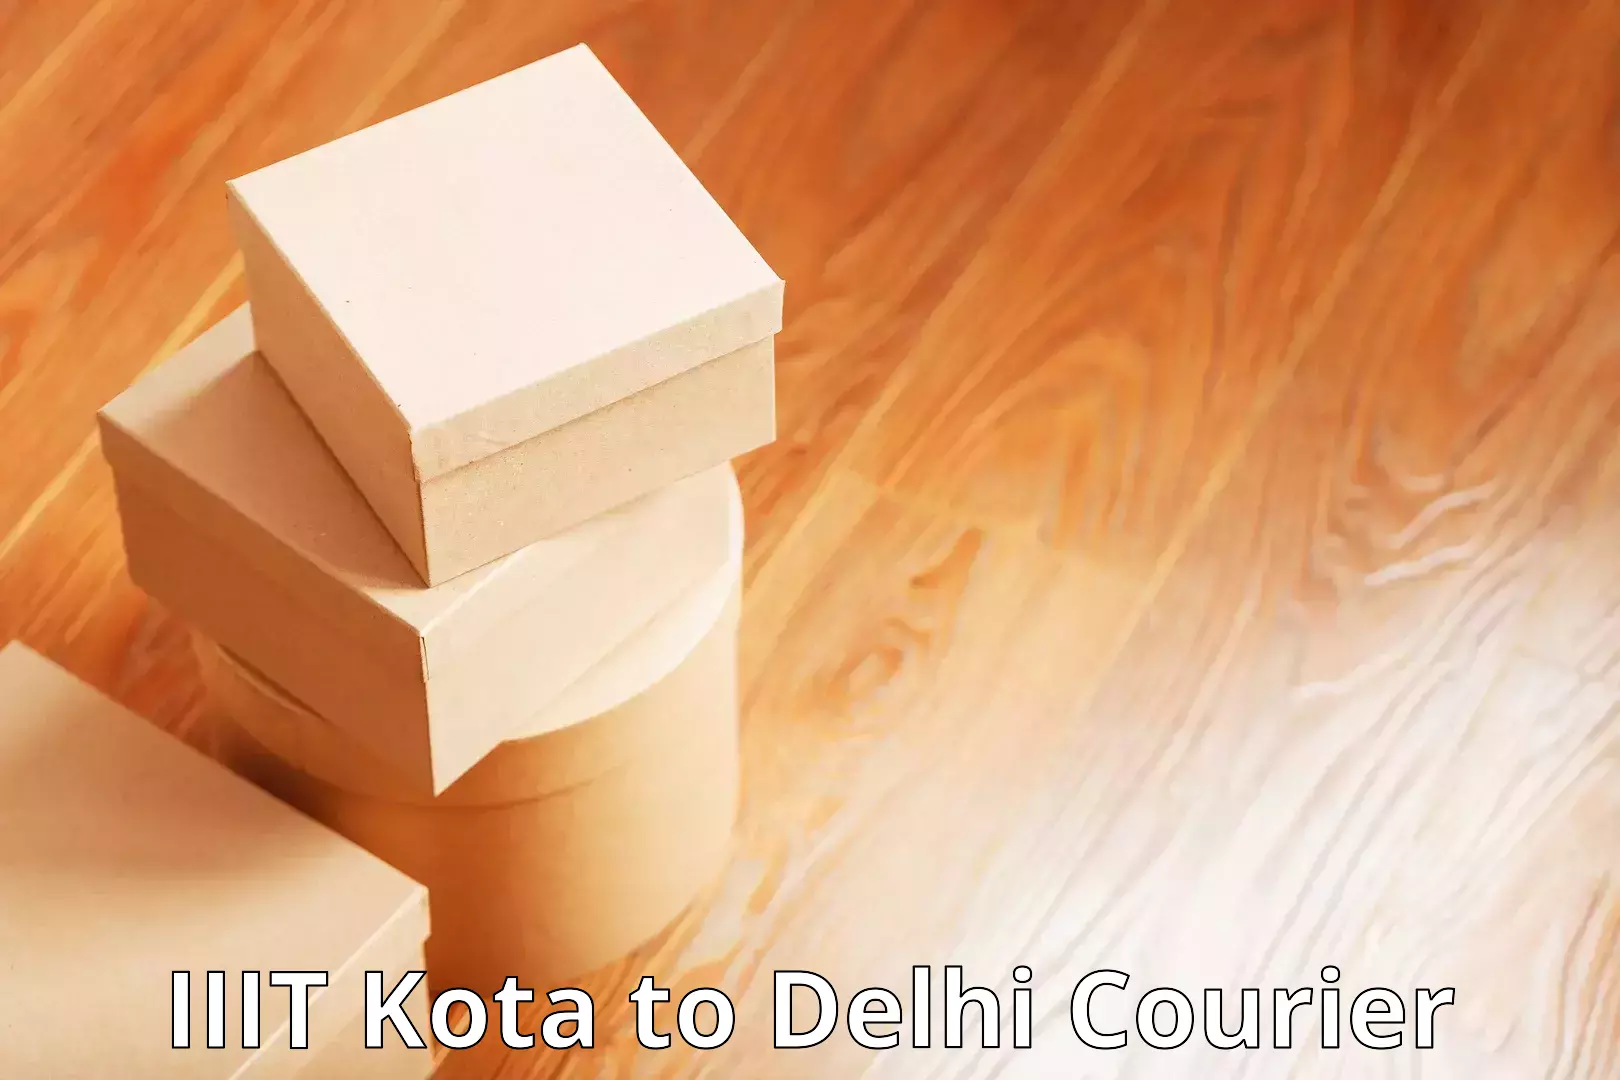 Tailored shipping services IIIT Kota to Delhi